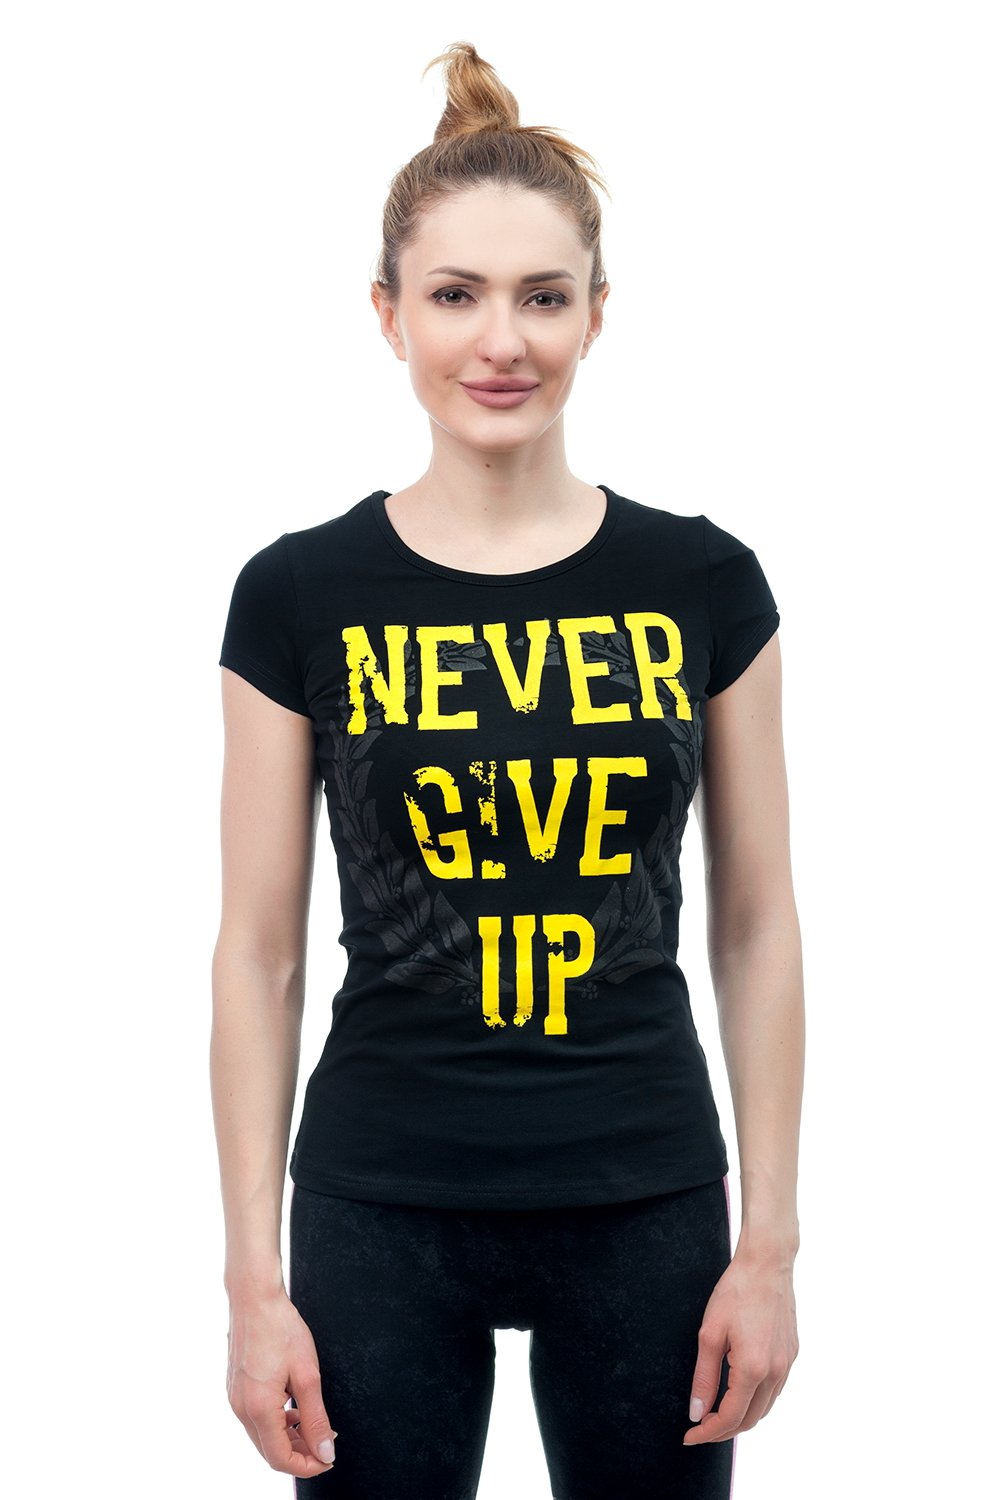 Women's Tee Never give up, black, size XS